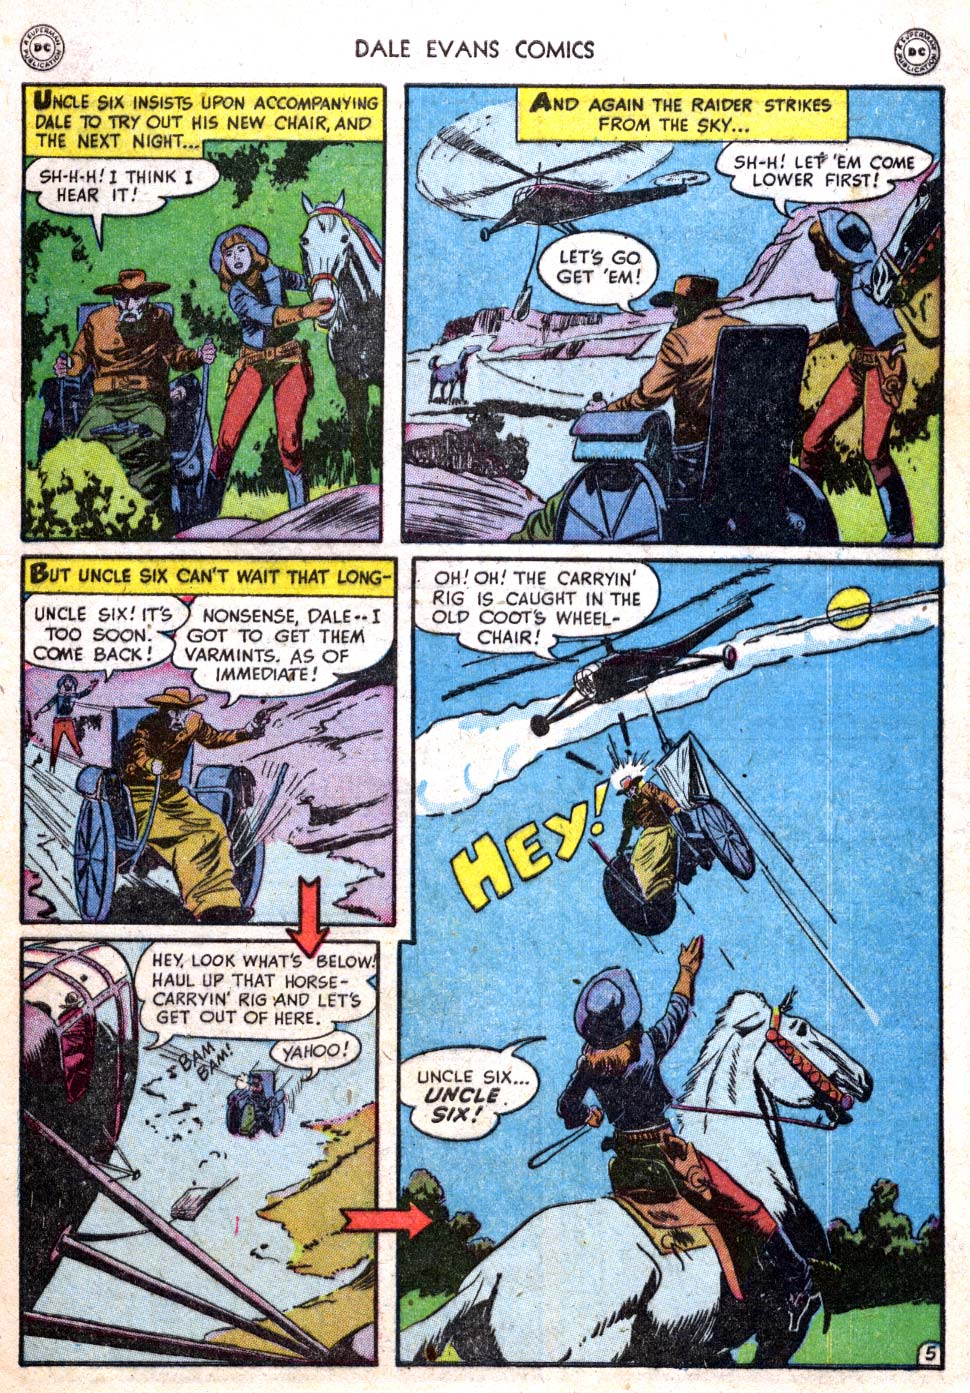 Dale Evans Comics issue 5 - Page 7